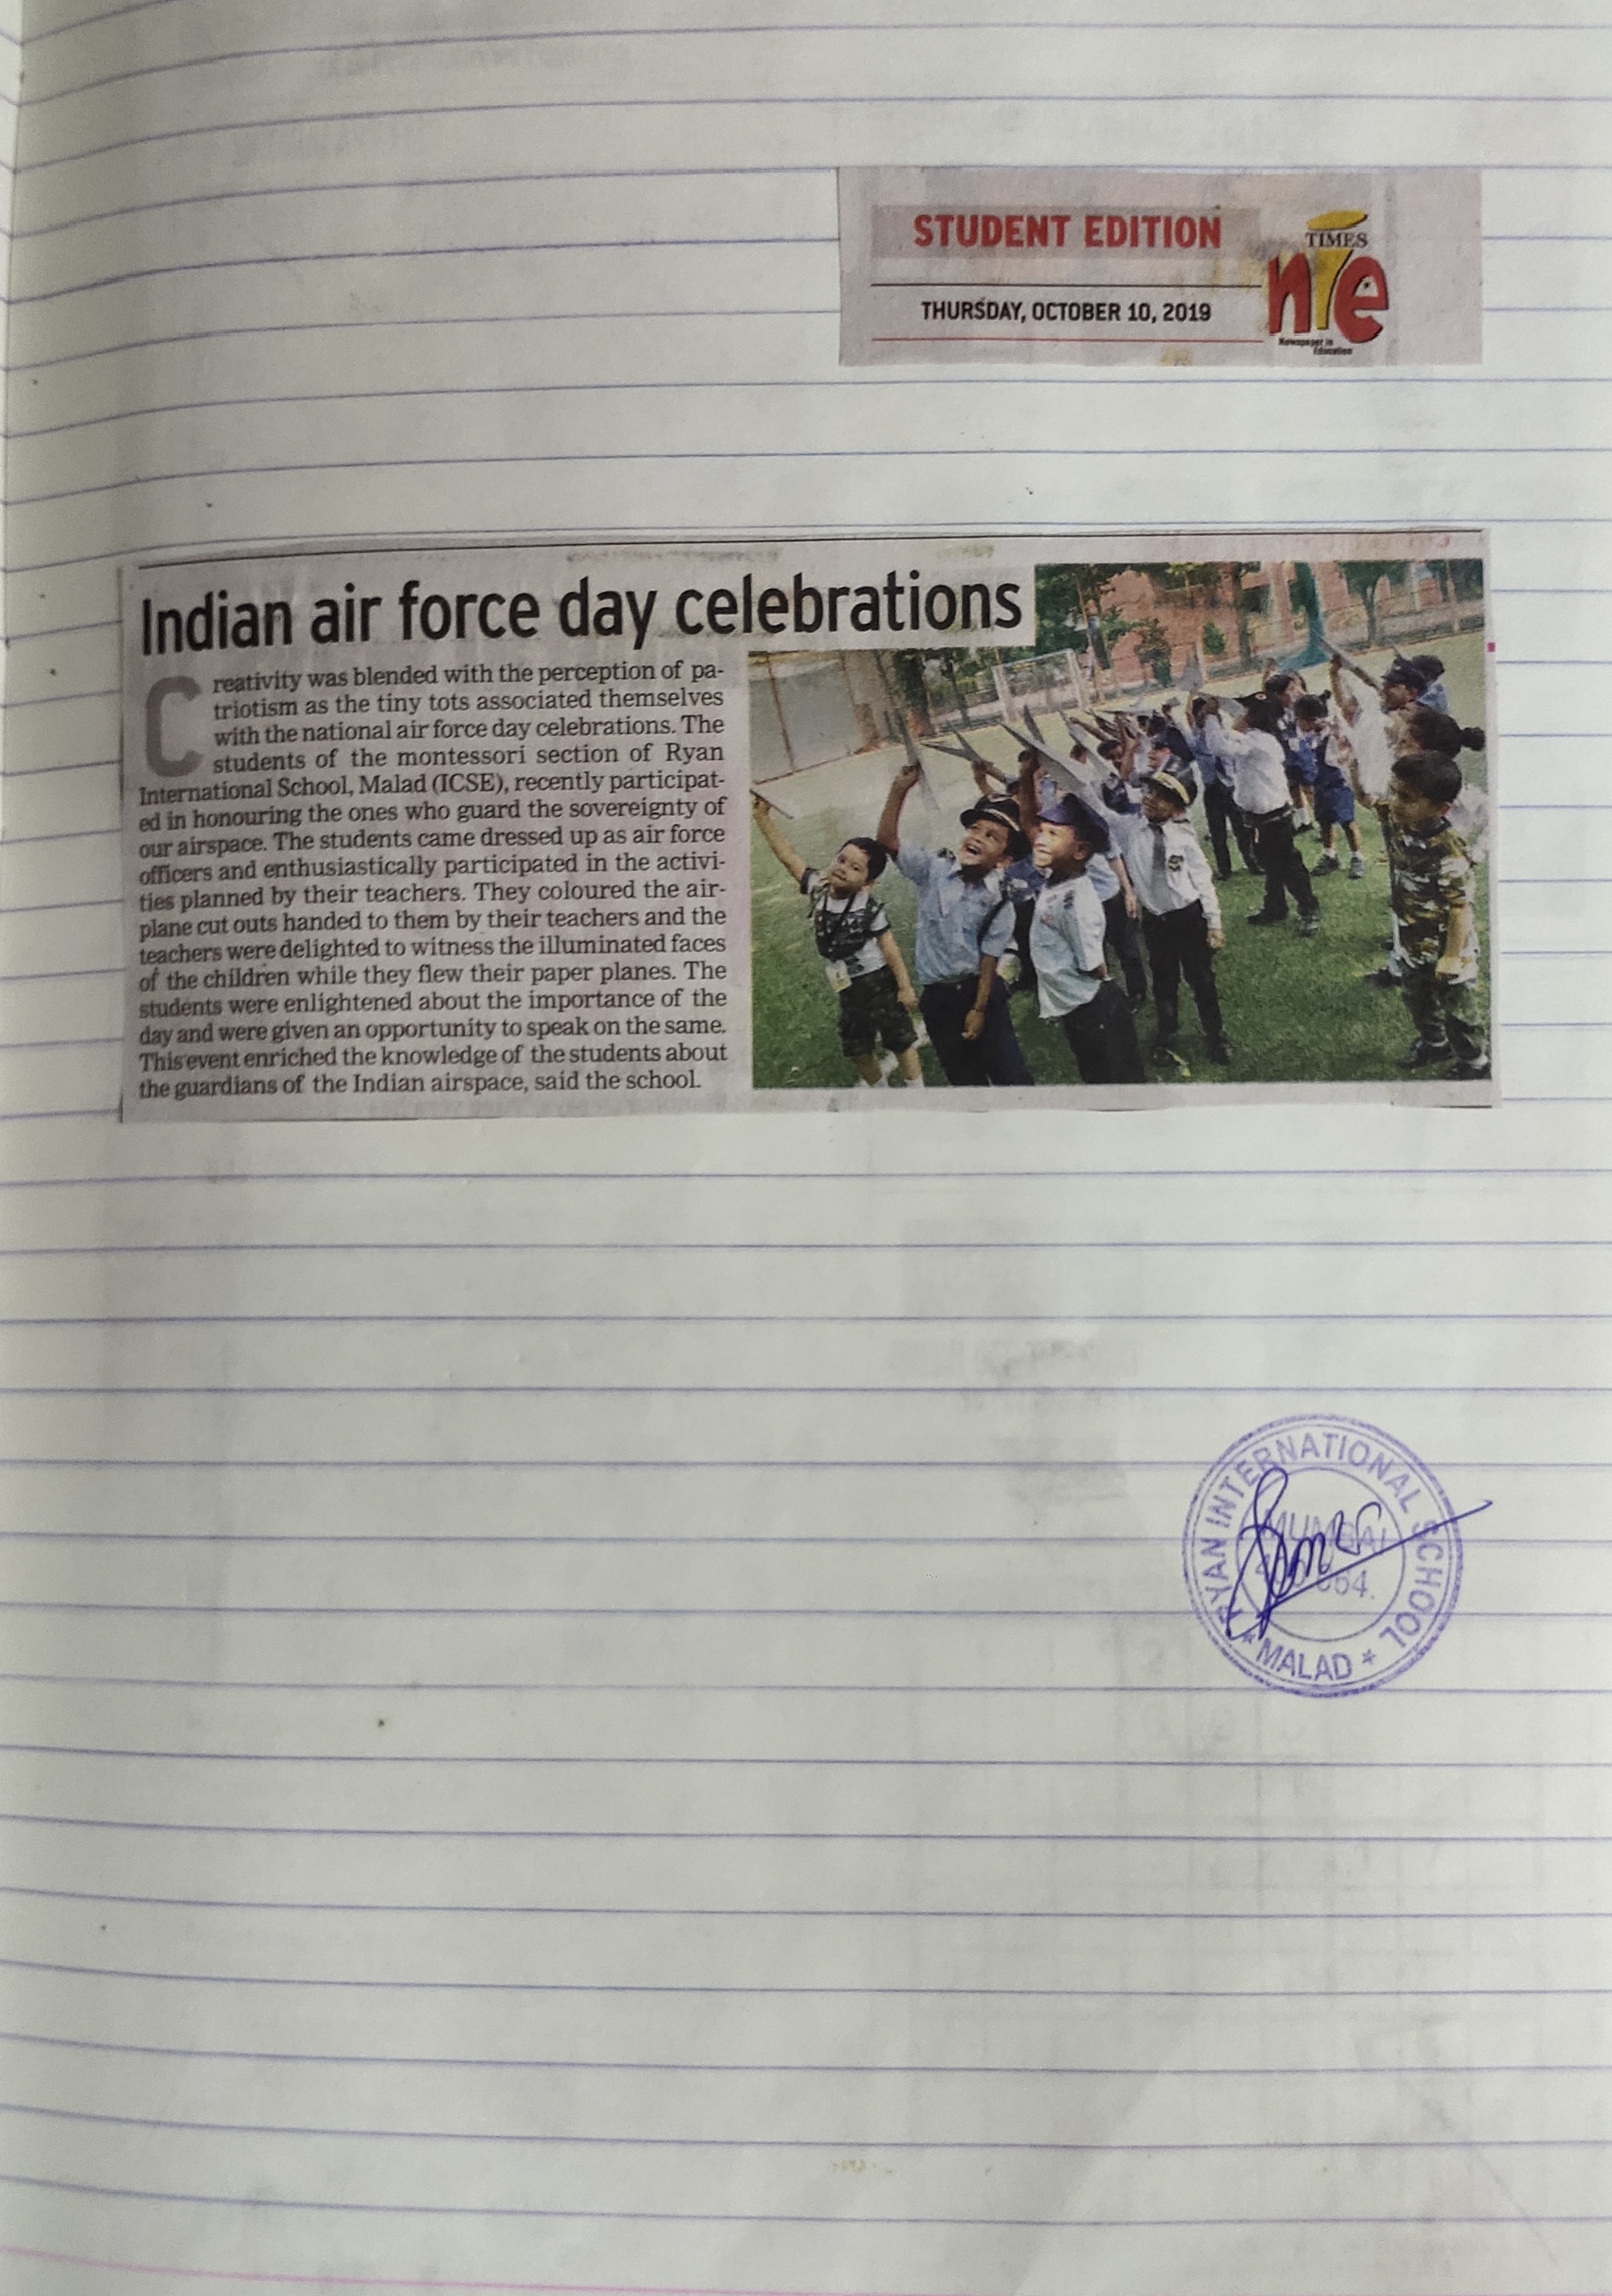 An article under the name “Indian Air Force” was published in the Times of India